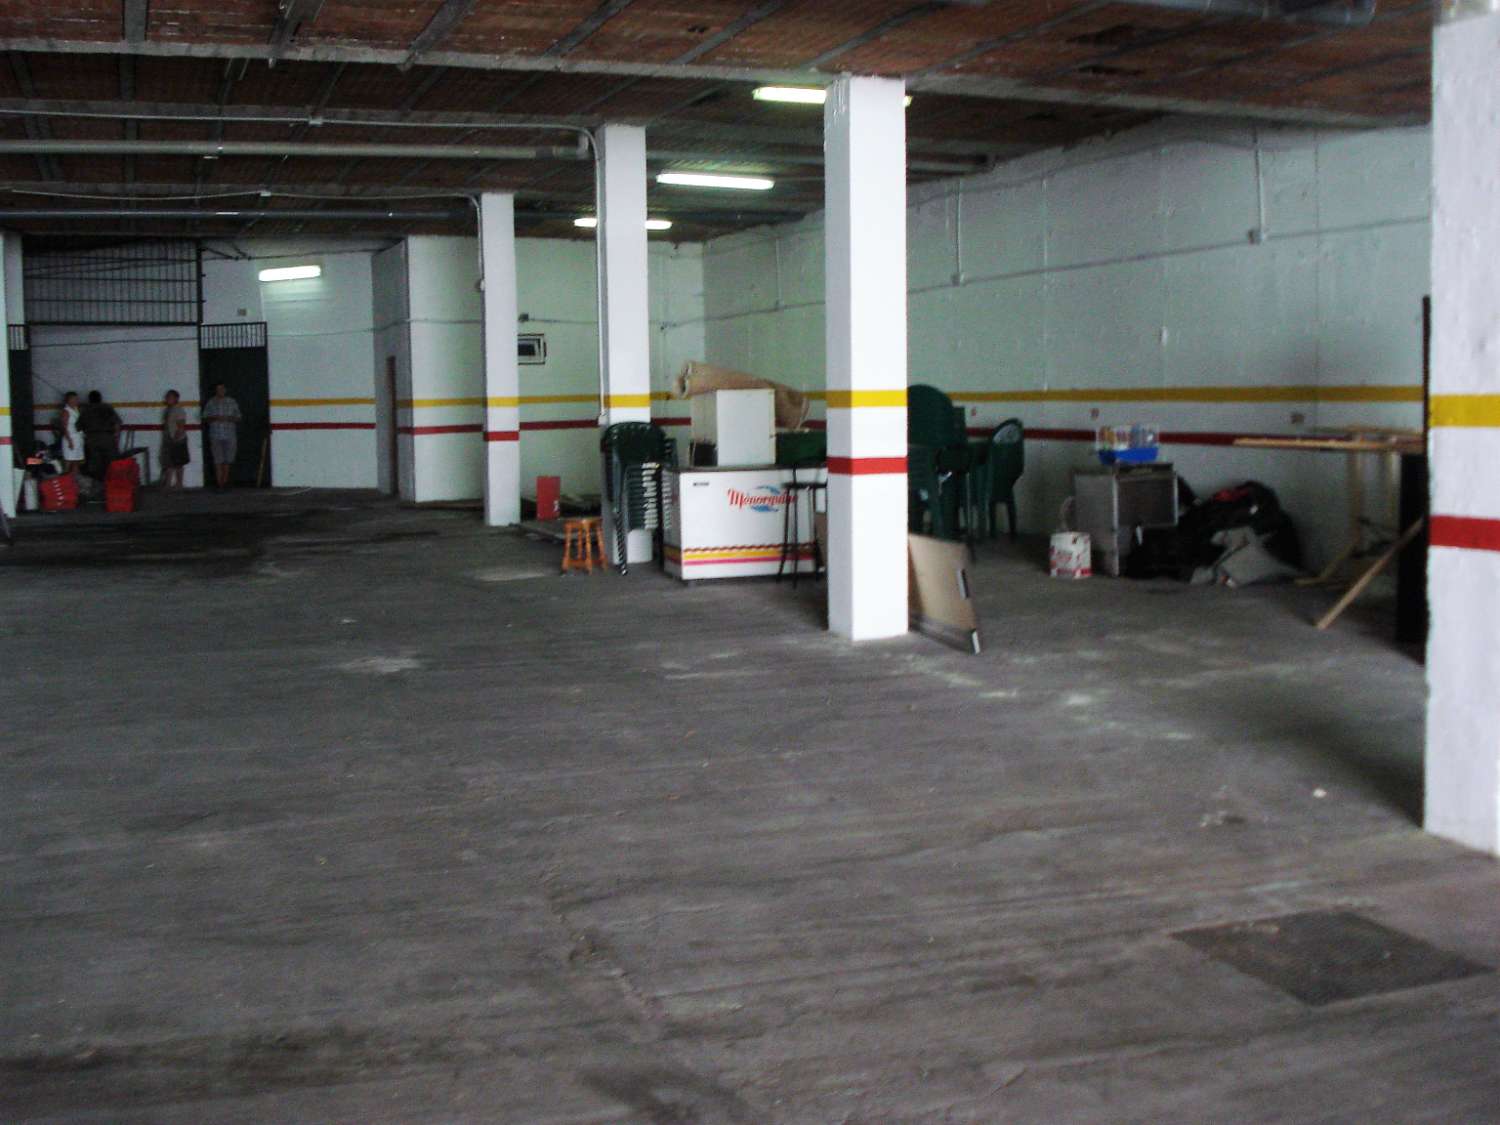 Sale of commercial property in Benalmadena, Malaga, Spain - Ideal warehouse, distributor or mini-storage